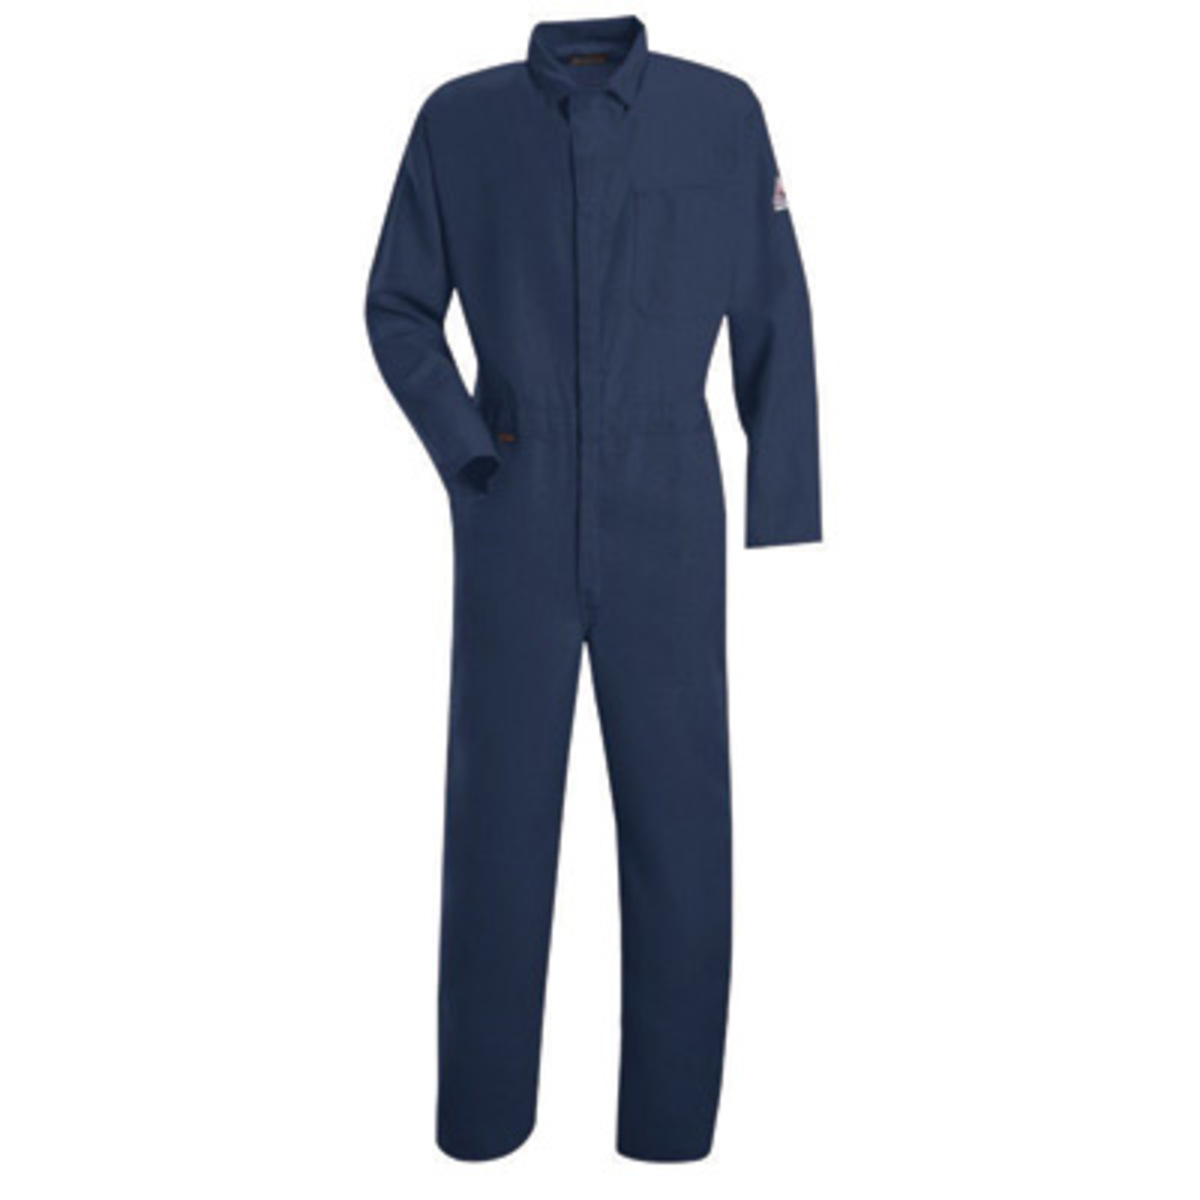 Stanco Safety Products™ 2X Navy Blue Nomex® IIIA Arc Rated Flame Resistant Coveralls With Concealed 2-Way Front Zipper Closure A